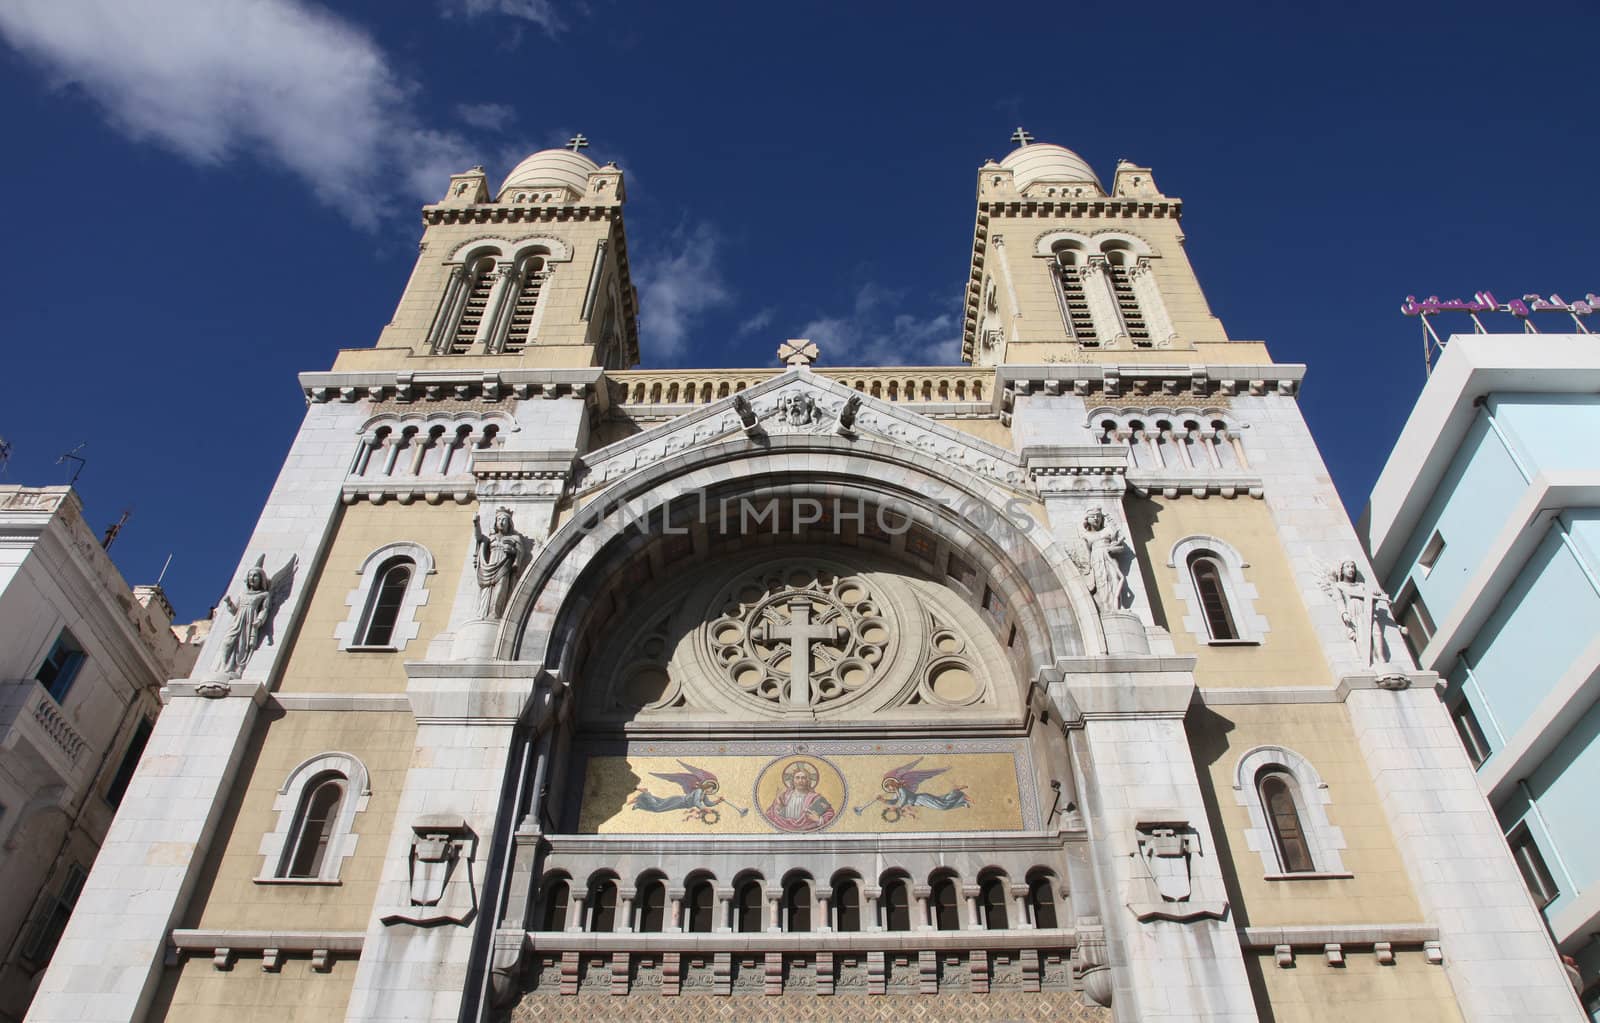 The Cathedral of St Vincent de Paul is a Roman Catholic cathedral in Tunis